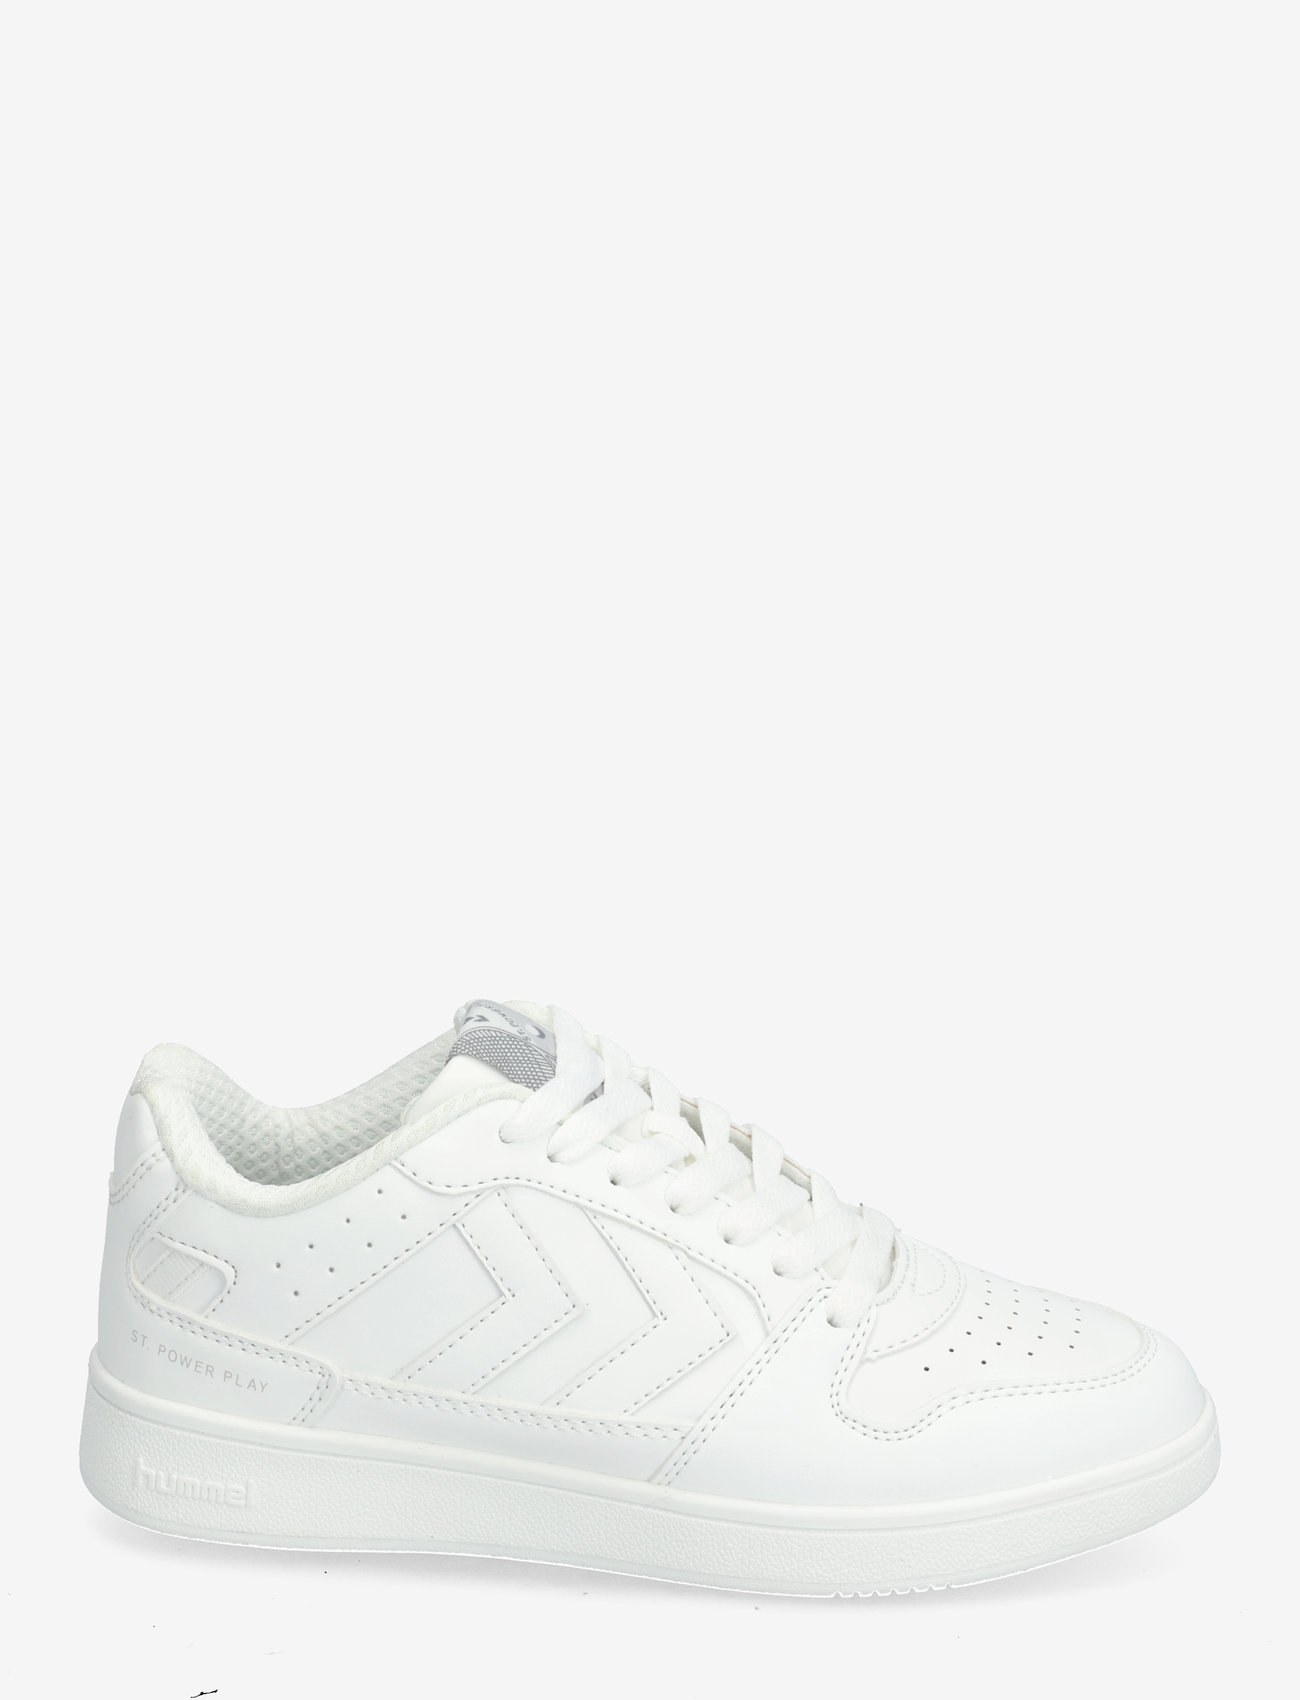 Hummel - ST. POWER PLAY - low top sneakers - white - 1